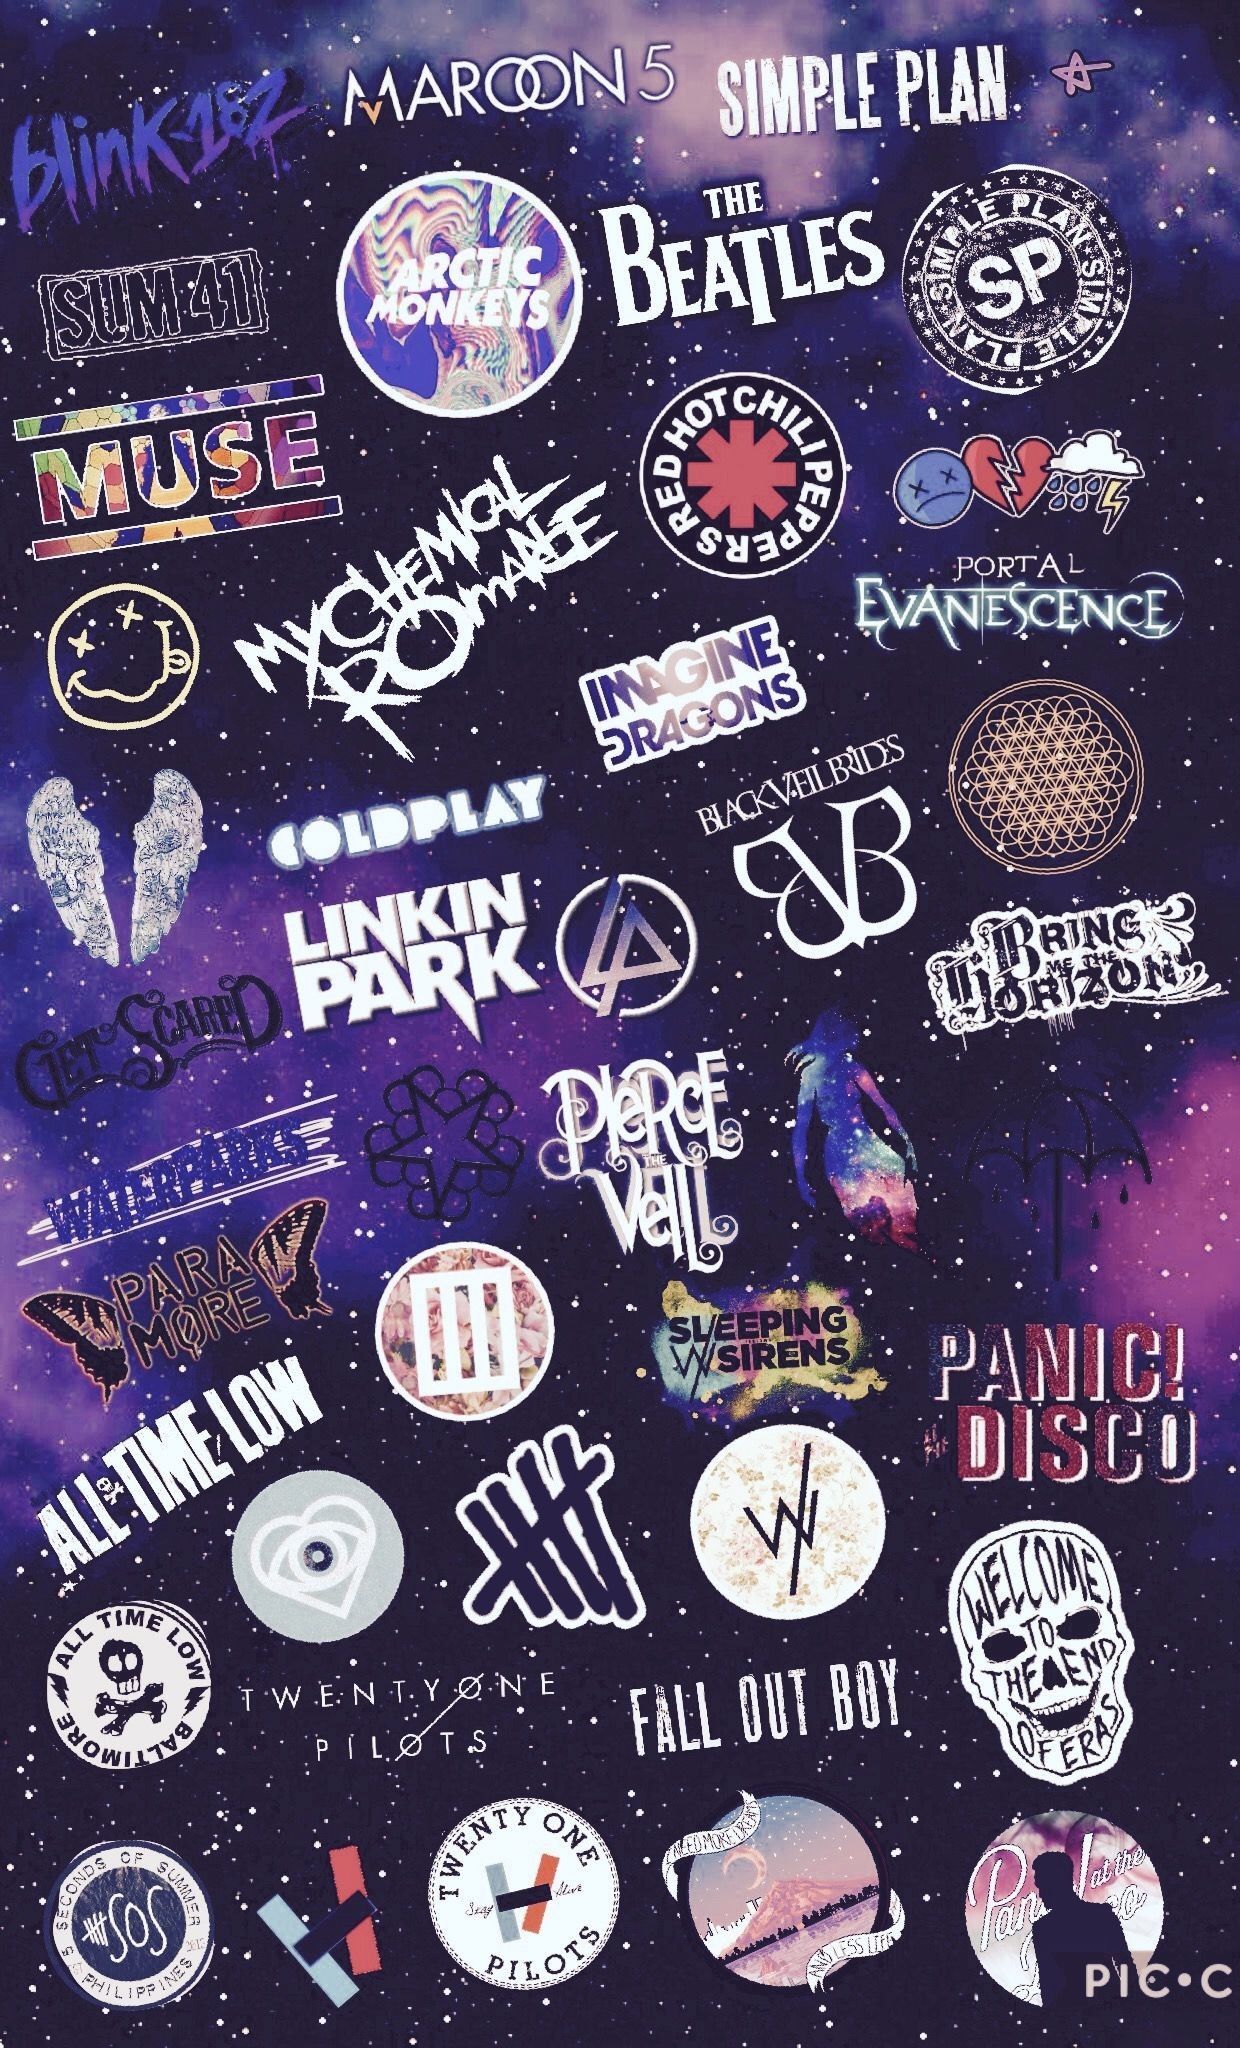 Aesthetic wallpaper for phone with bands, music groups and stickers - Rock, emo, punk